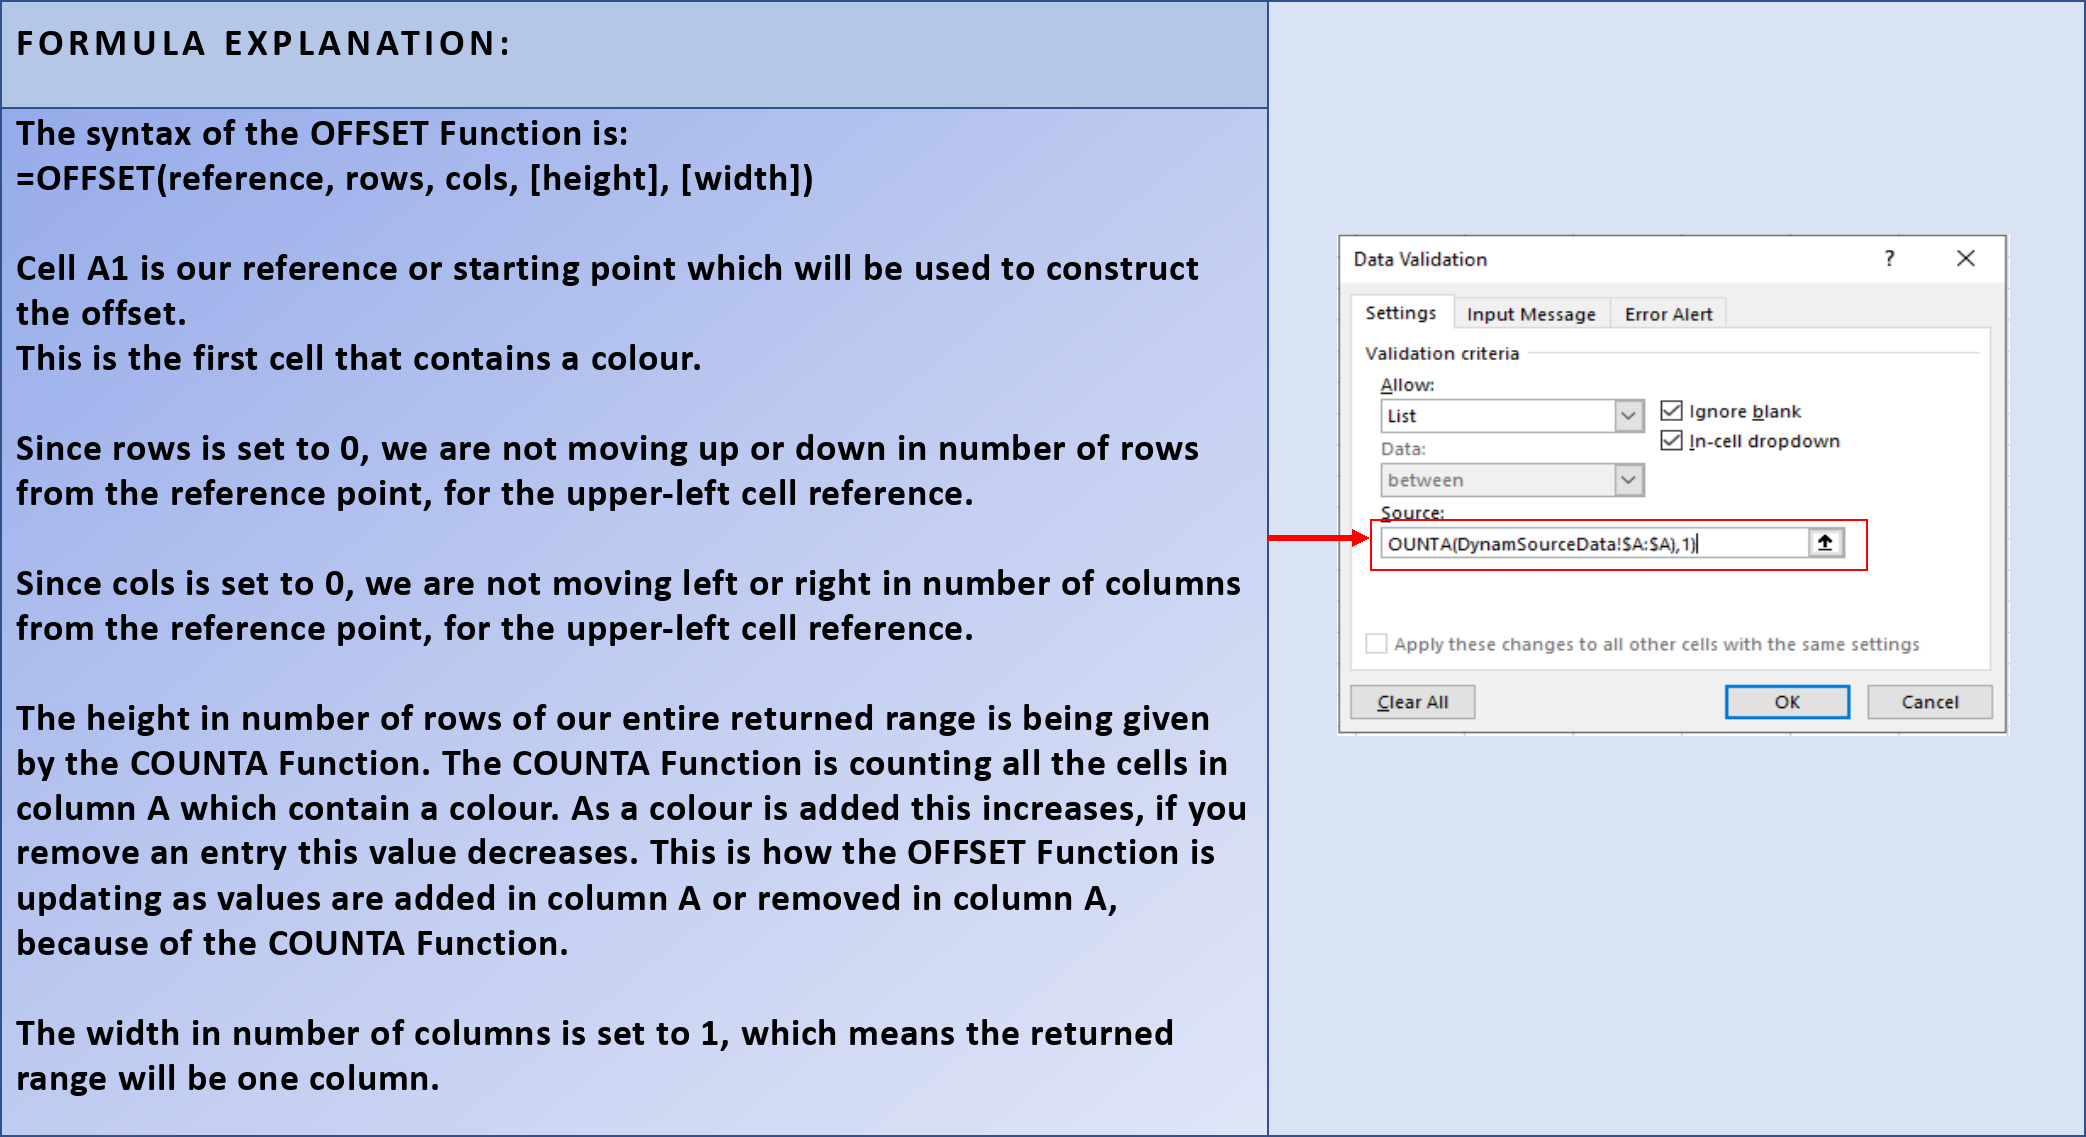 Screenshot showing the OFFSET formula explanation which is entered into the Source box of the Data Validation Dialog box